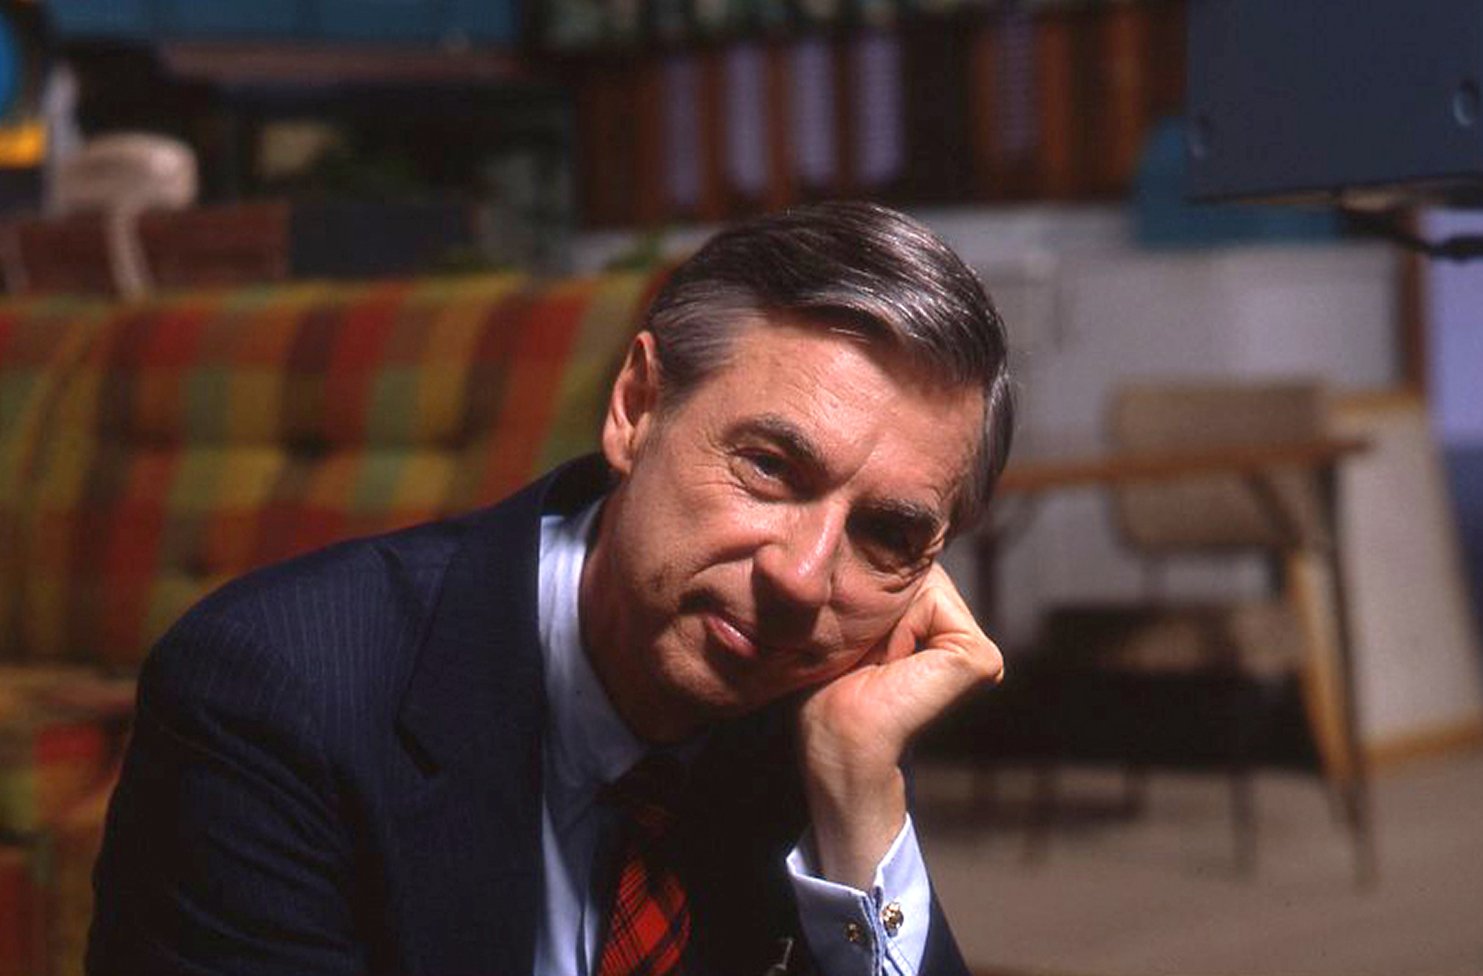 WON'T YOU BE MY NEIGHBOR, mister rogers, documentary